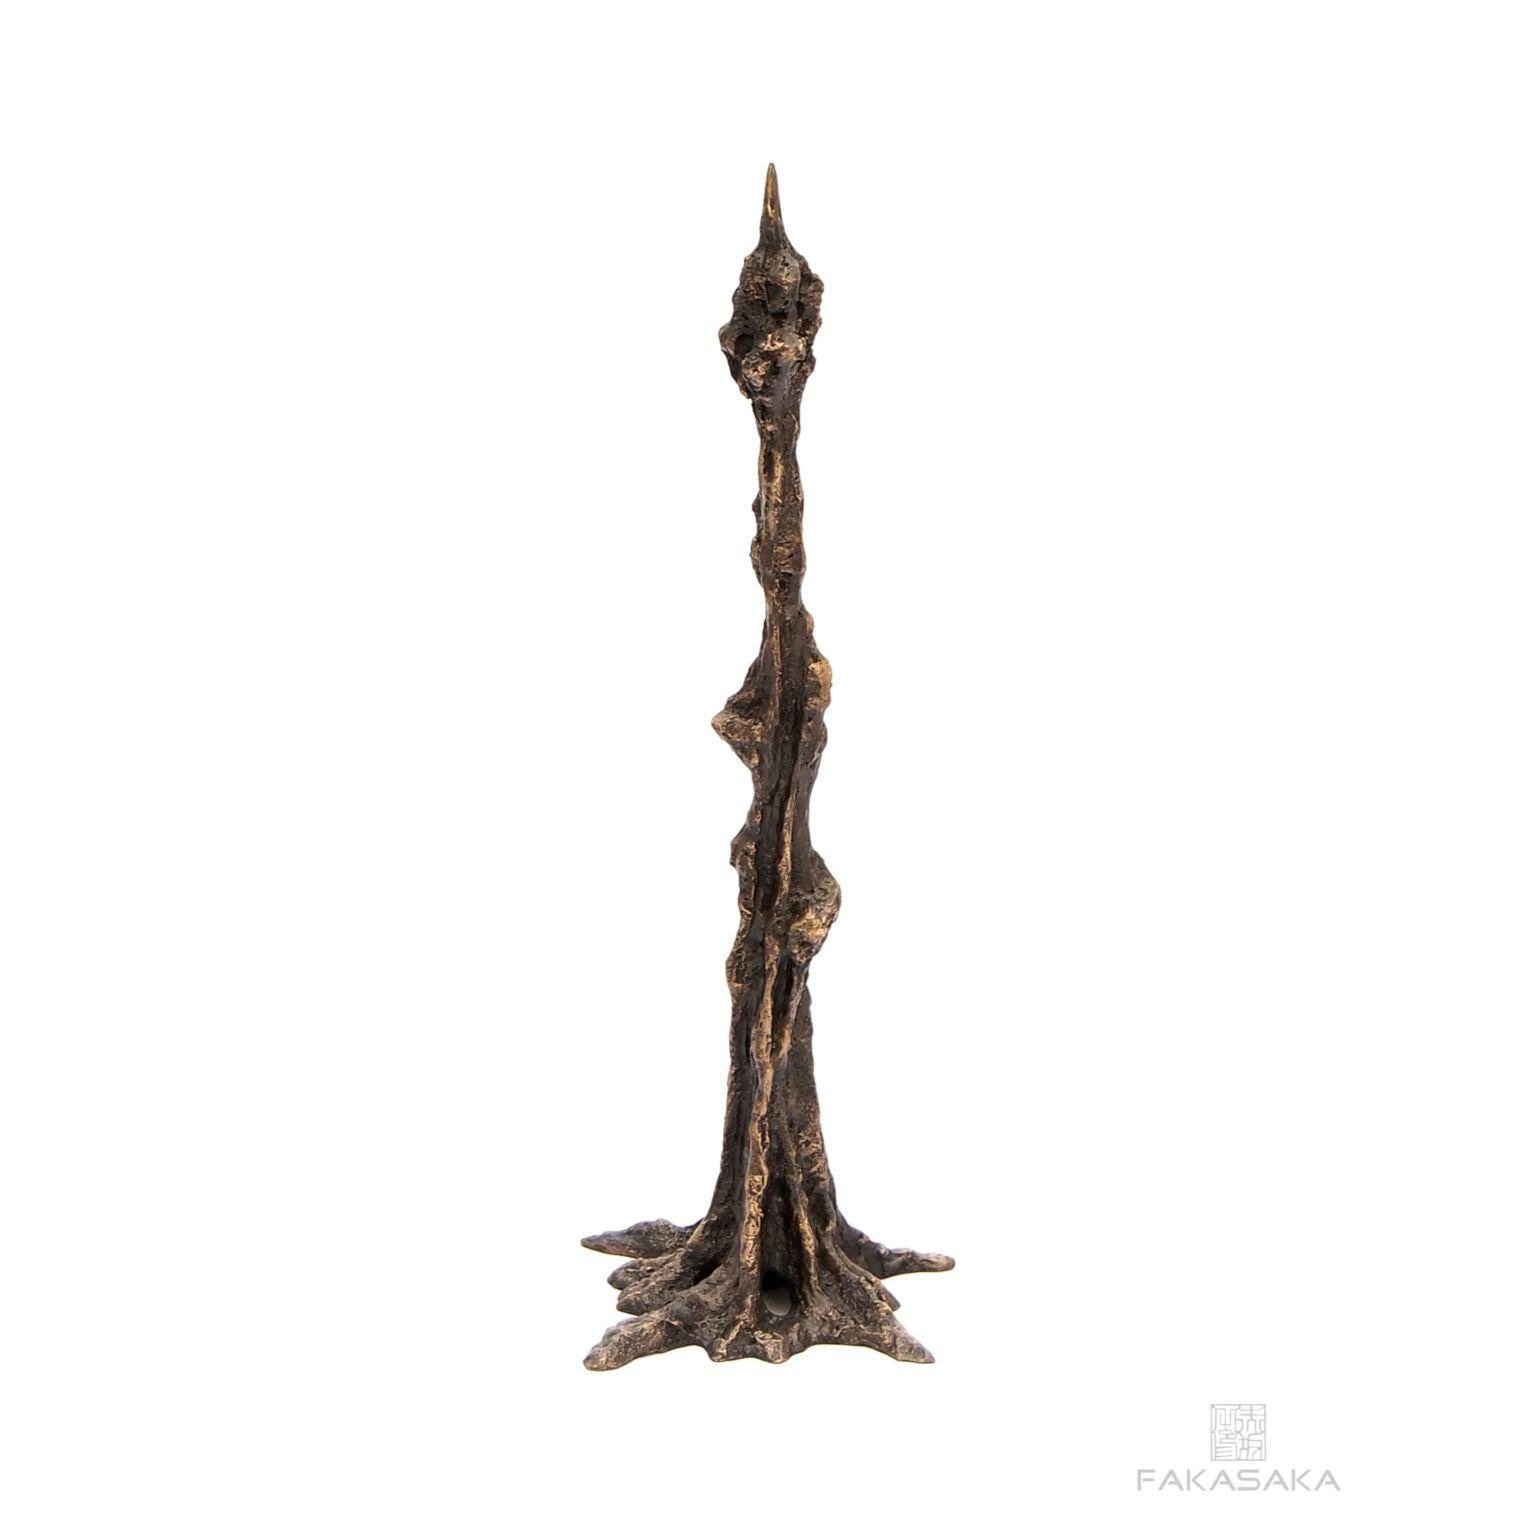 Leo candleholder by Fakasaka Design.
Dimensions: W 11 cm D 10 cm H 30.5 cm.
Materials: dark bronze.
Also available in polished bronze.

 FAKASAKA is a design company focused on production of high-end furniture, lighting, decorative objects,